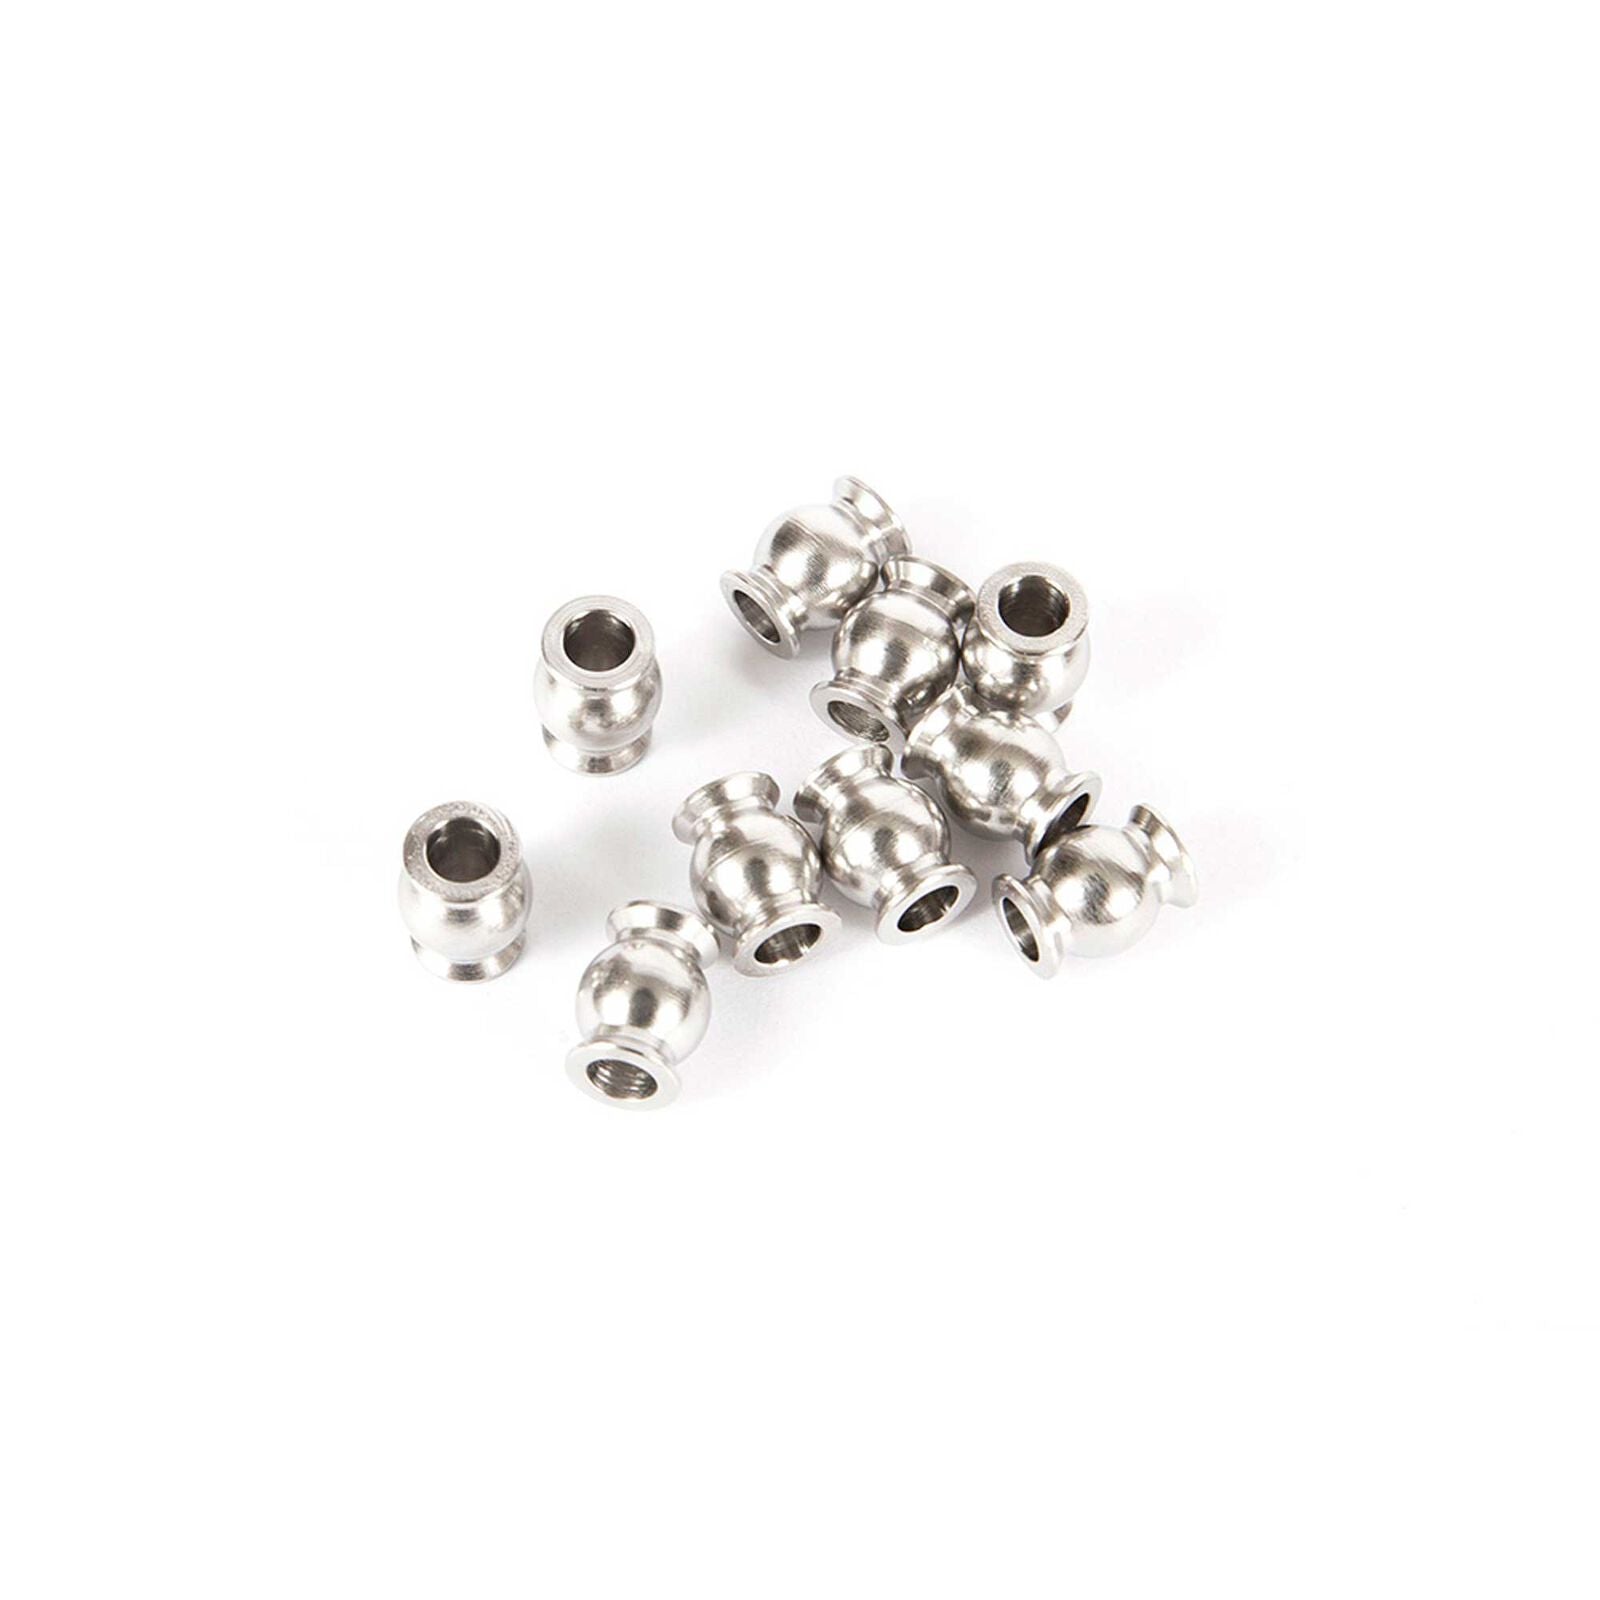 AXIAL AXI234004 Suspension Pivot Ball, Stainless Steel 7.5mm (10)